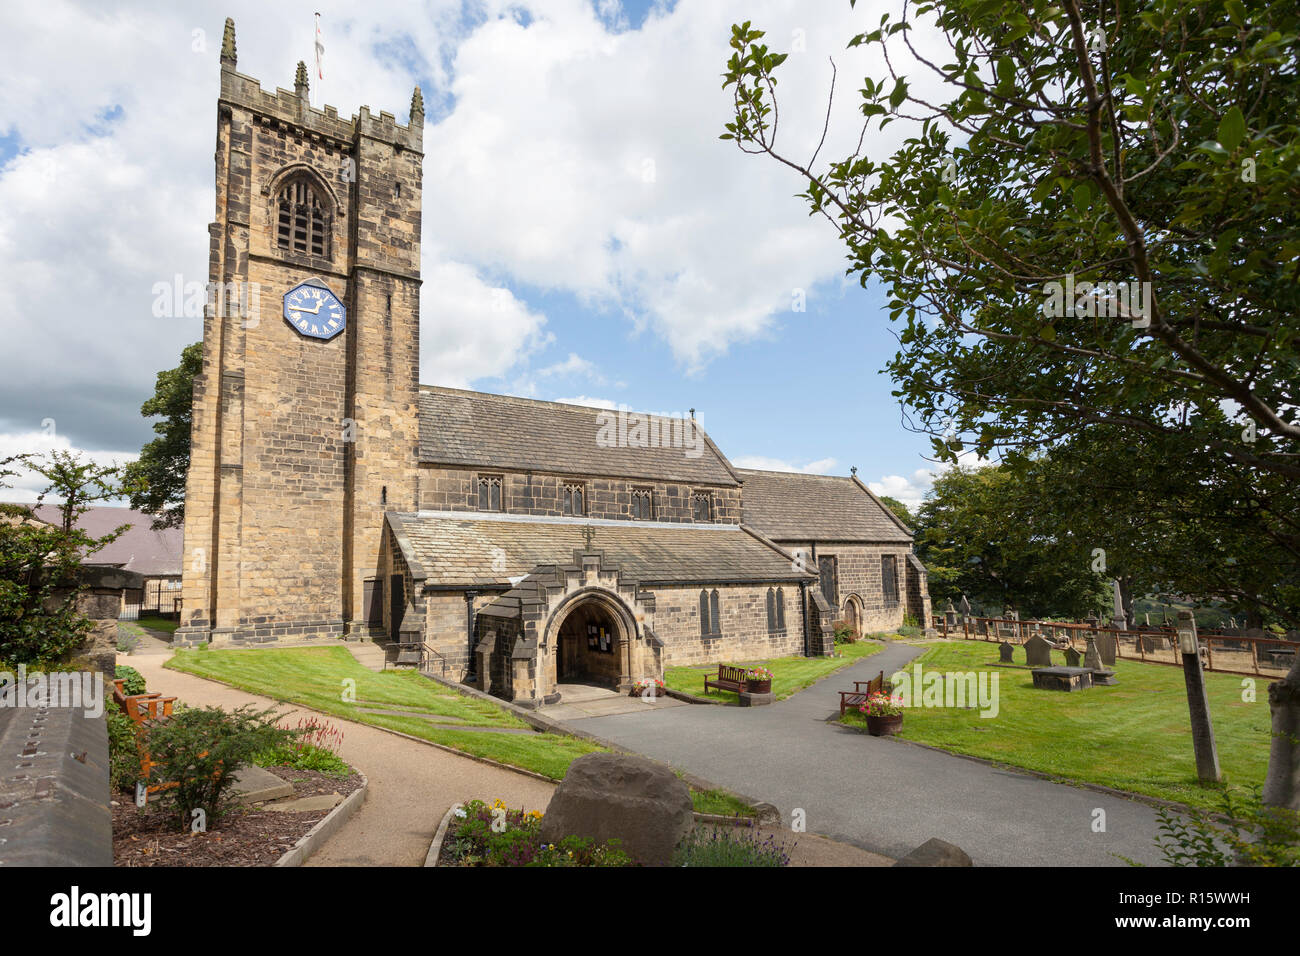 A Summer view of St Wilfrid's Parish Church in Calverley, West Yorkshire Stock Photo